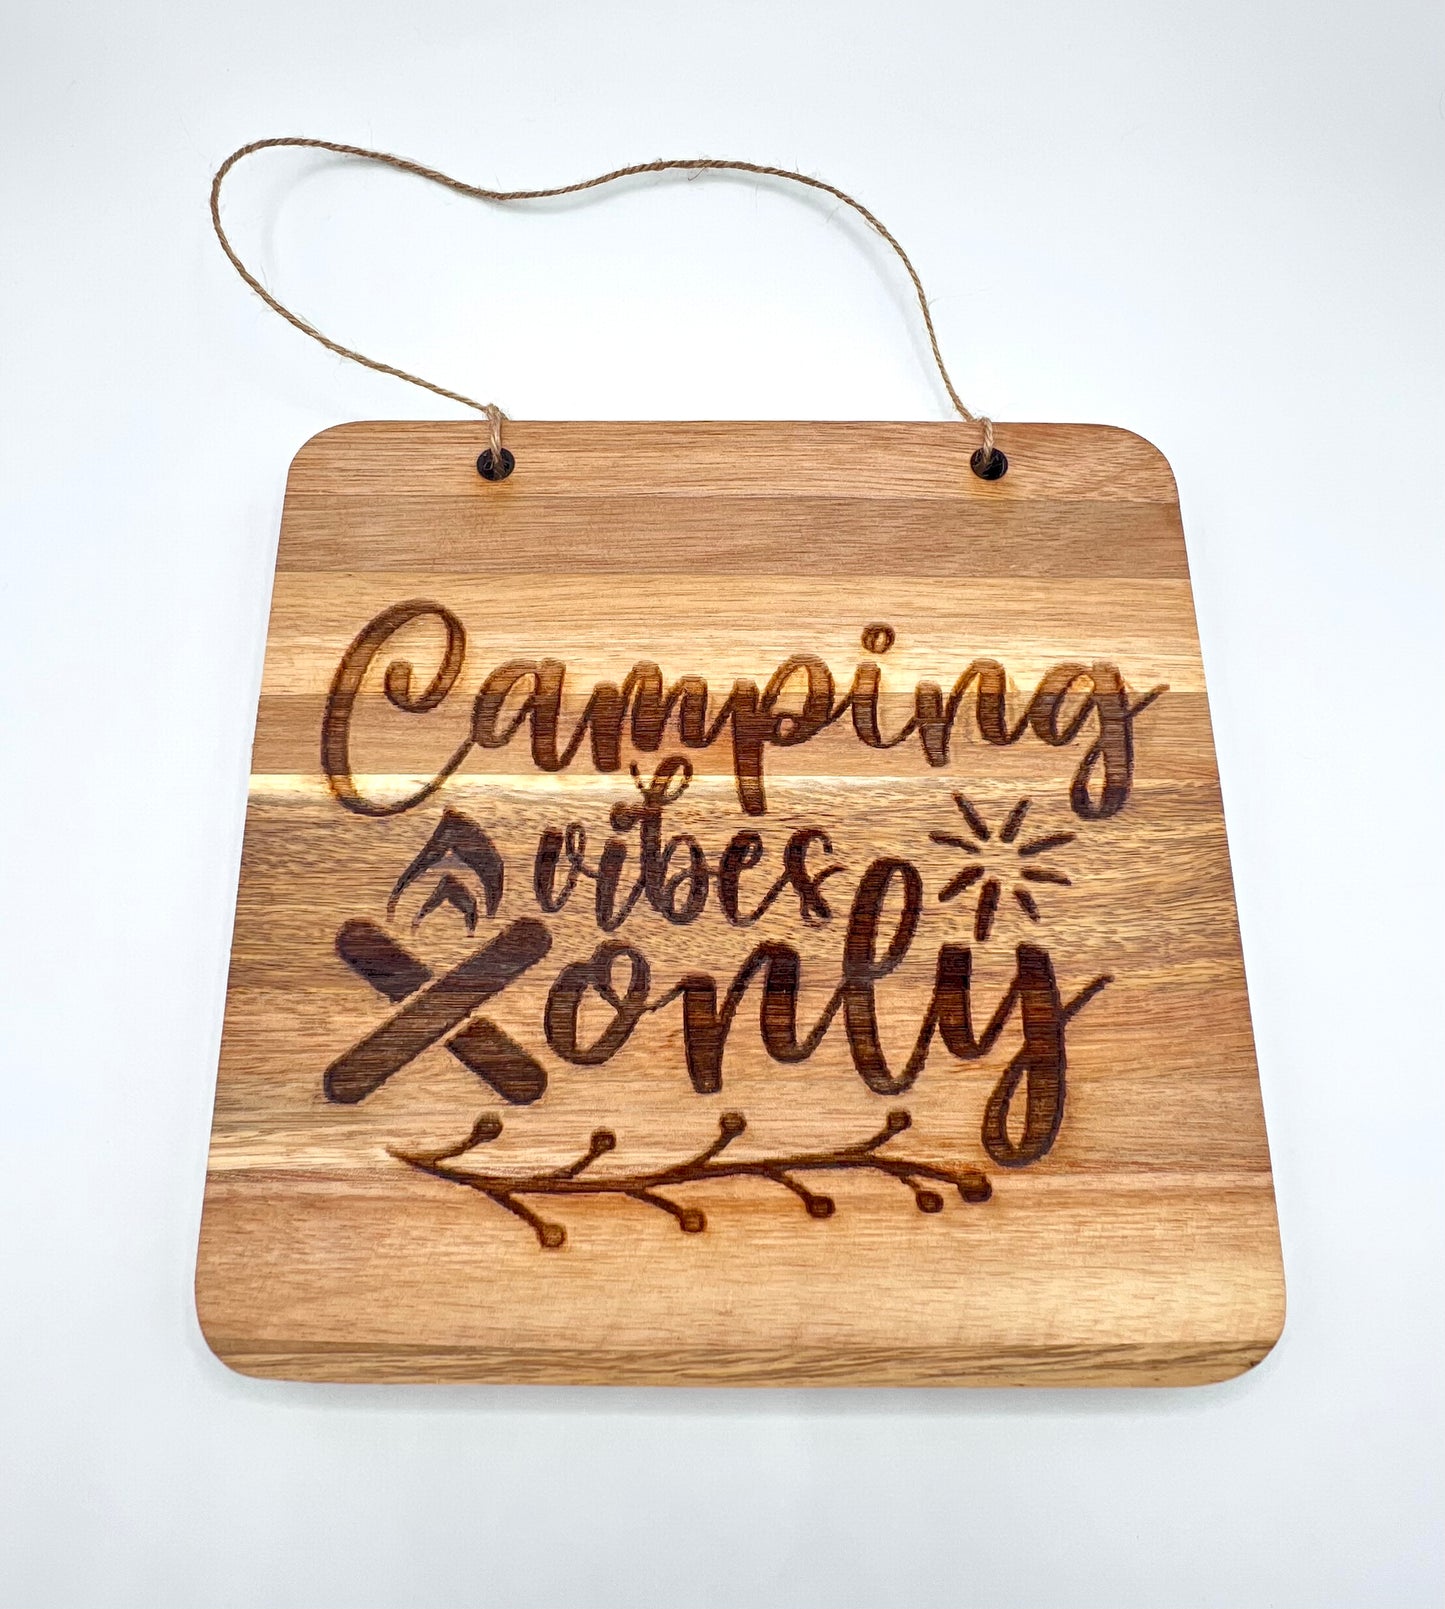 “Camping Vibes Only" Engraved on Acacia Wood